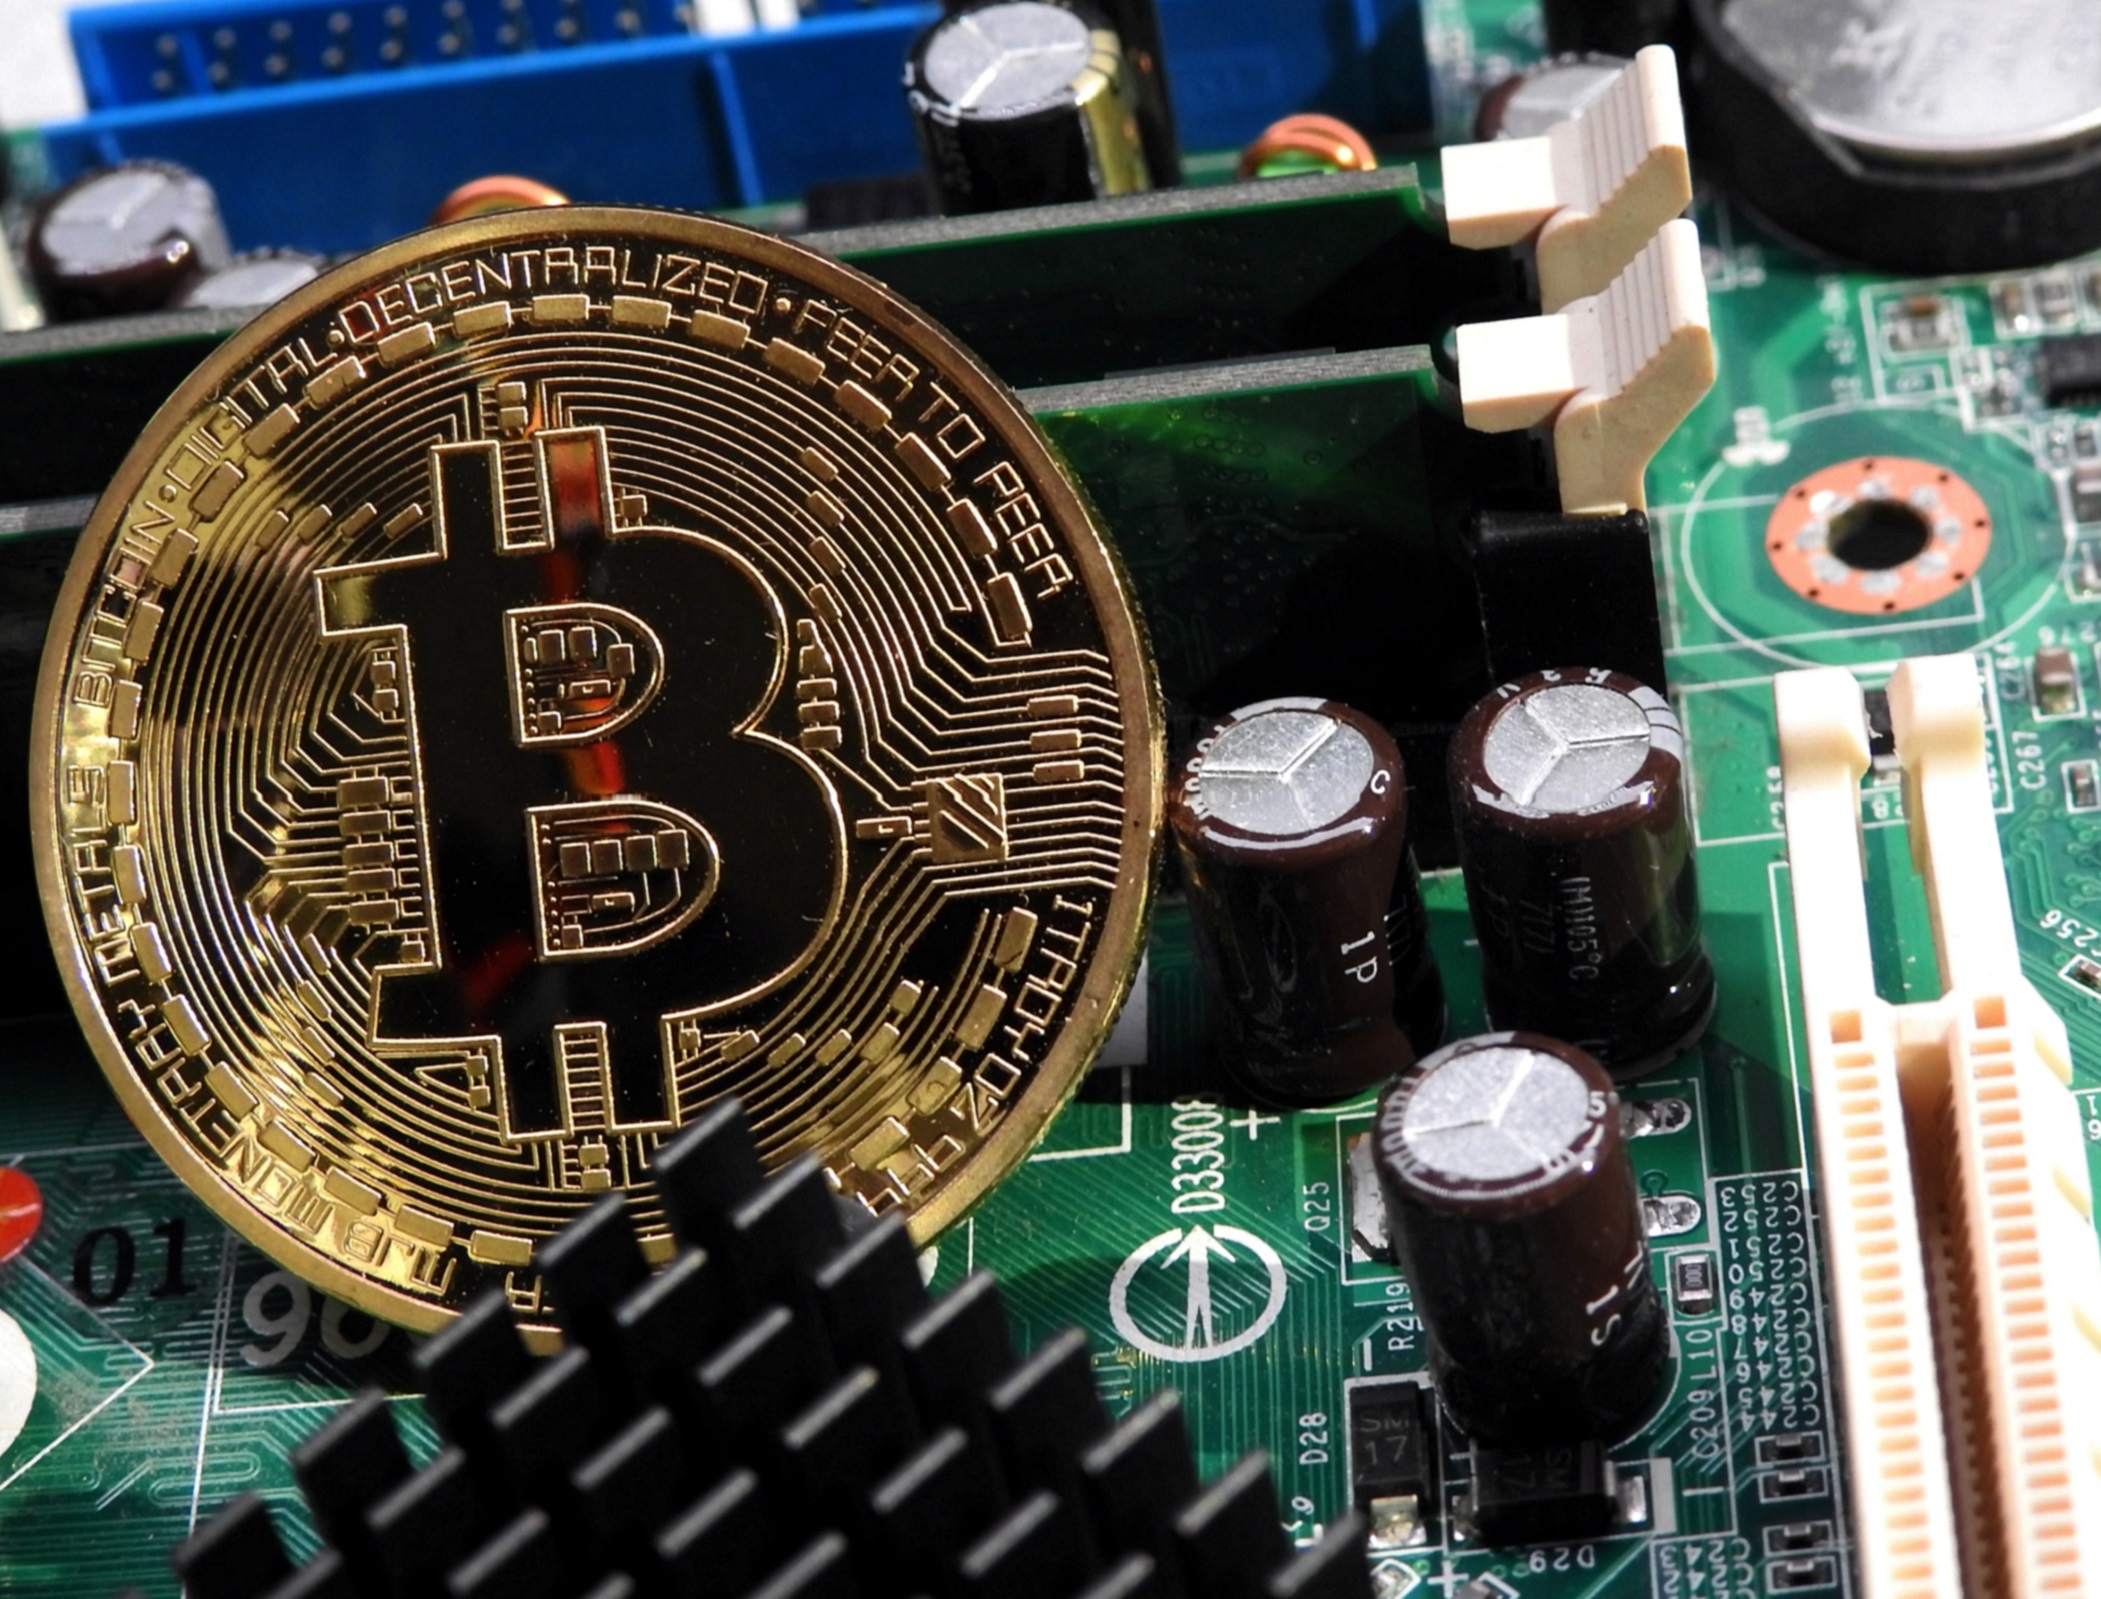 Bitcoin has ‘extremely troubling’ impact on climate change, report finds